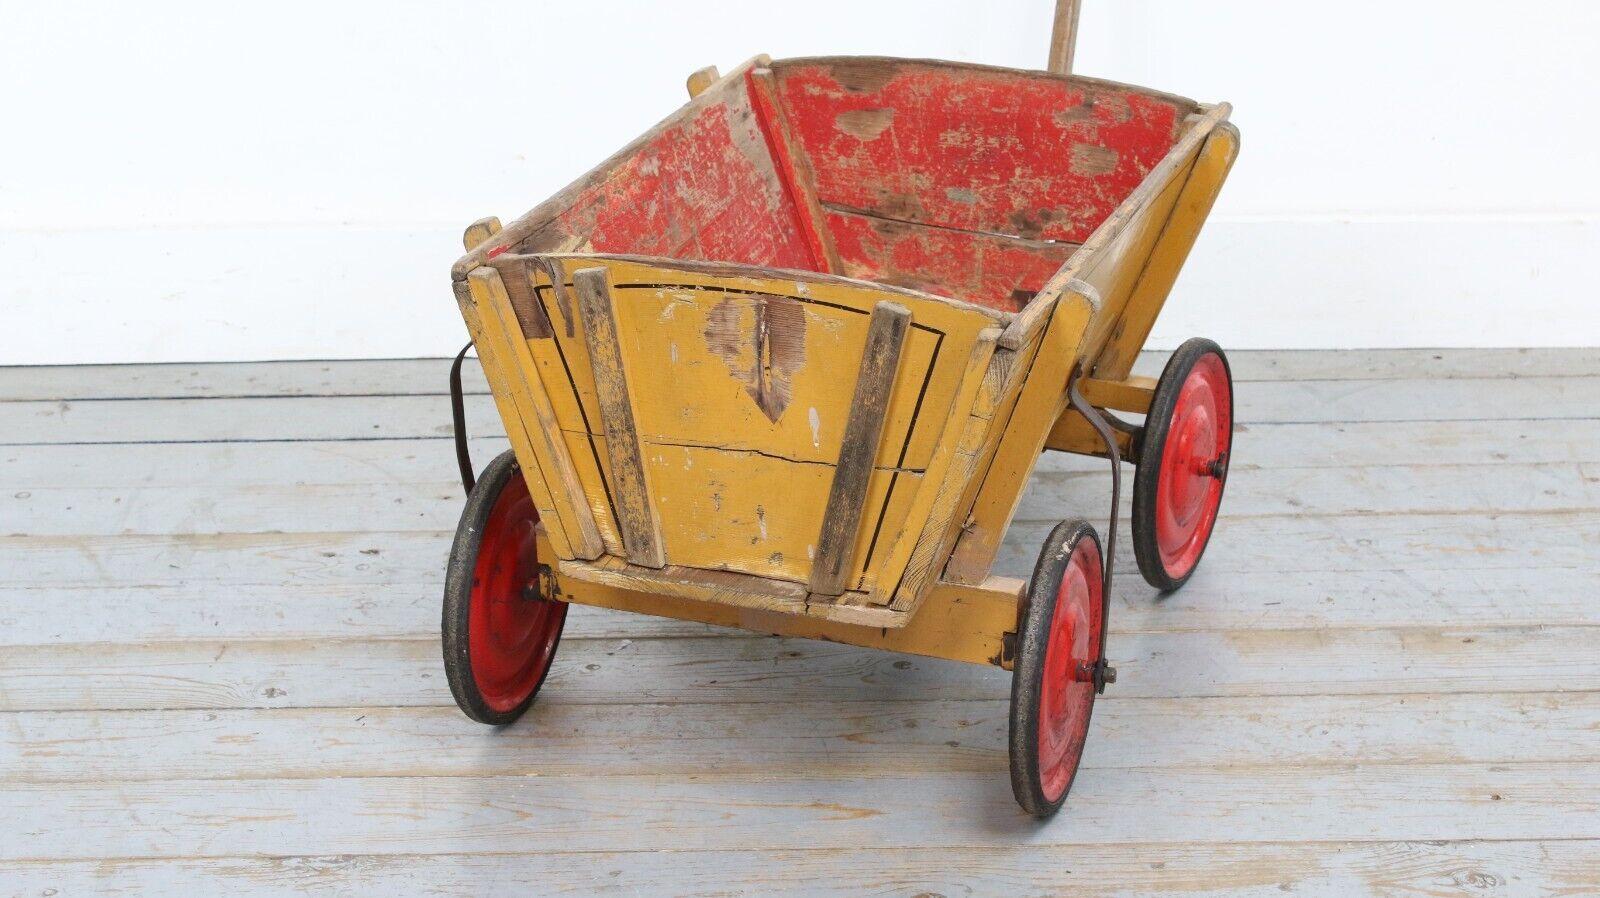 Wiser Pine Tin Log Coal Decorative Cart Truck Storage

A pine and tin cart/truck made by Weser in the 1930s. The cart has a red and yellow finish and a mid-century design. 

The front and back panels can be removed, making it ideal for log storage